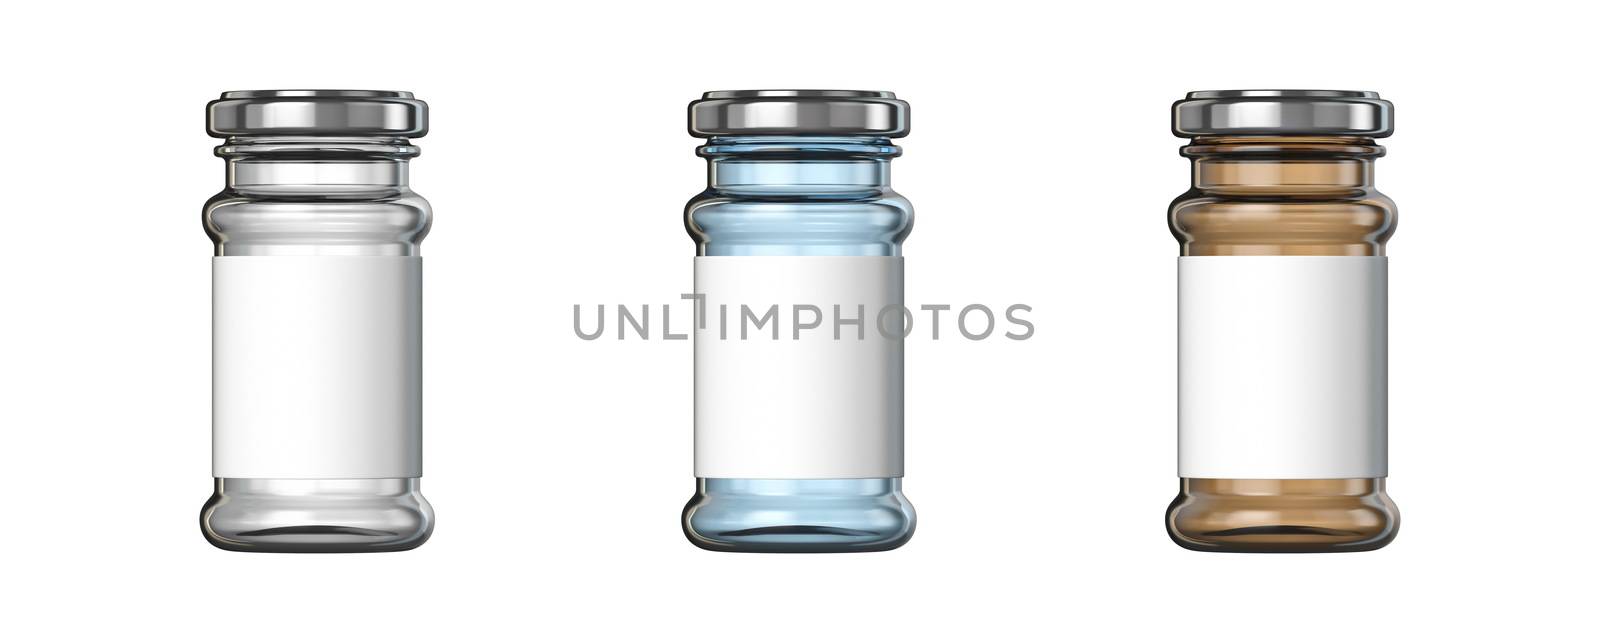 White, blue and brown big glass jars white label 3D render illustration isolated on white background